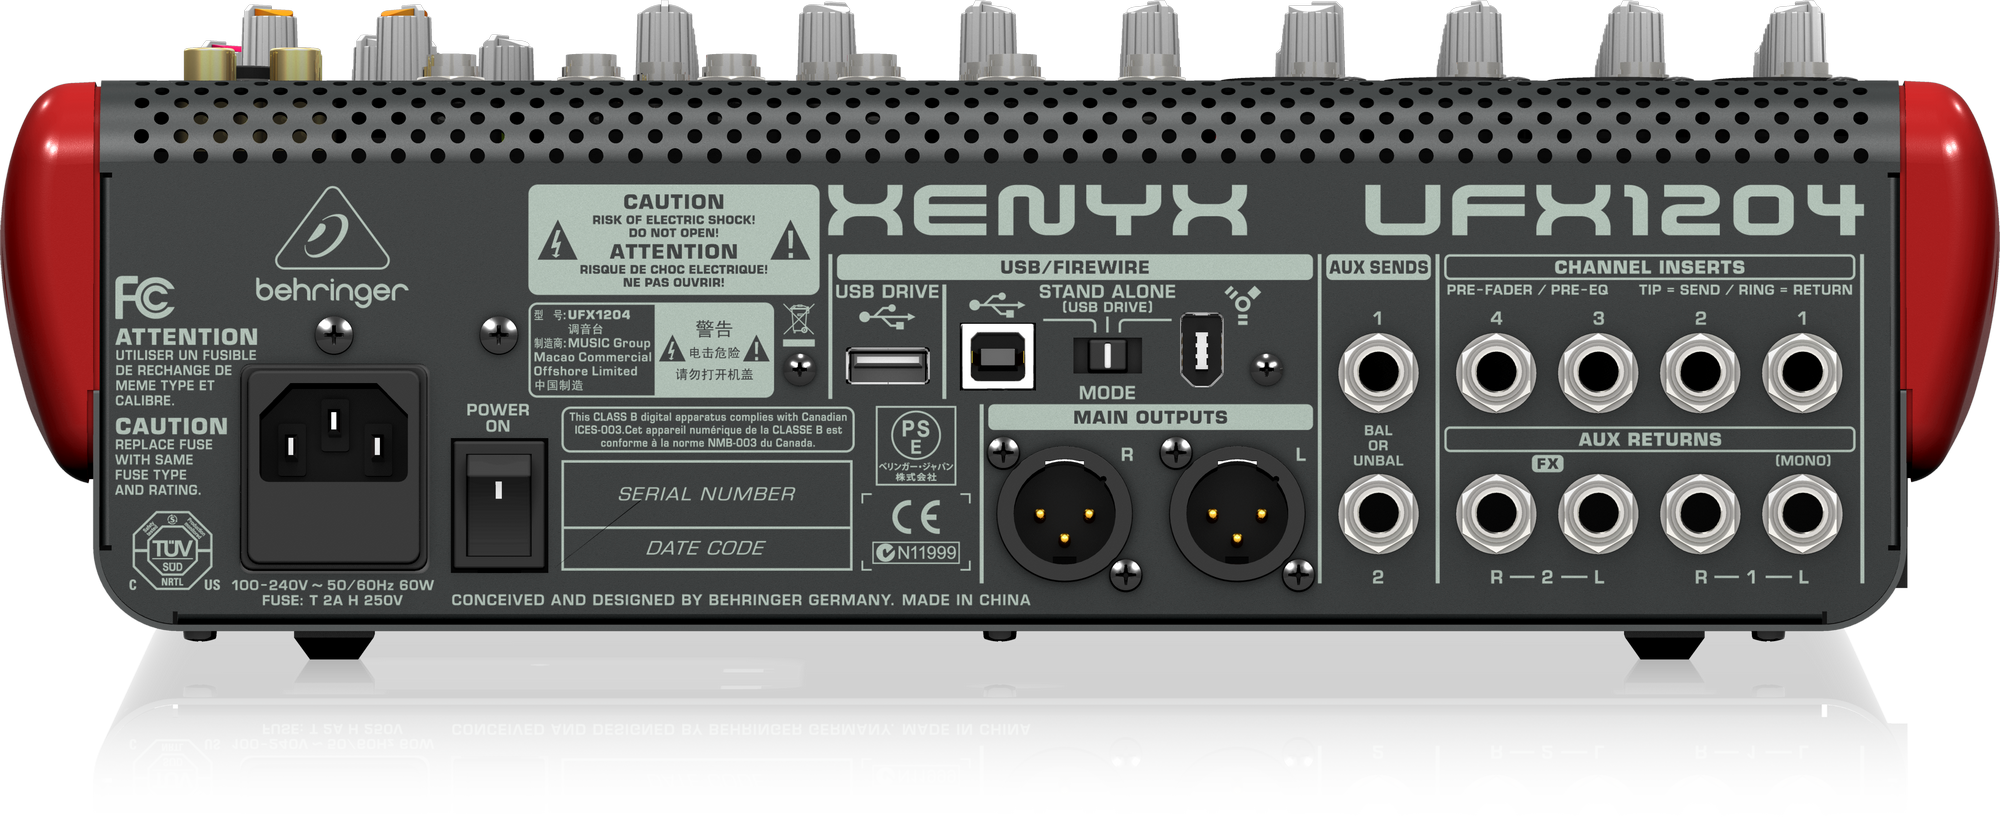 behringer xenyx x1204usb download drivers